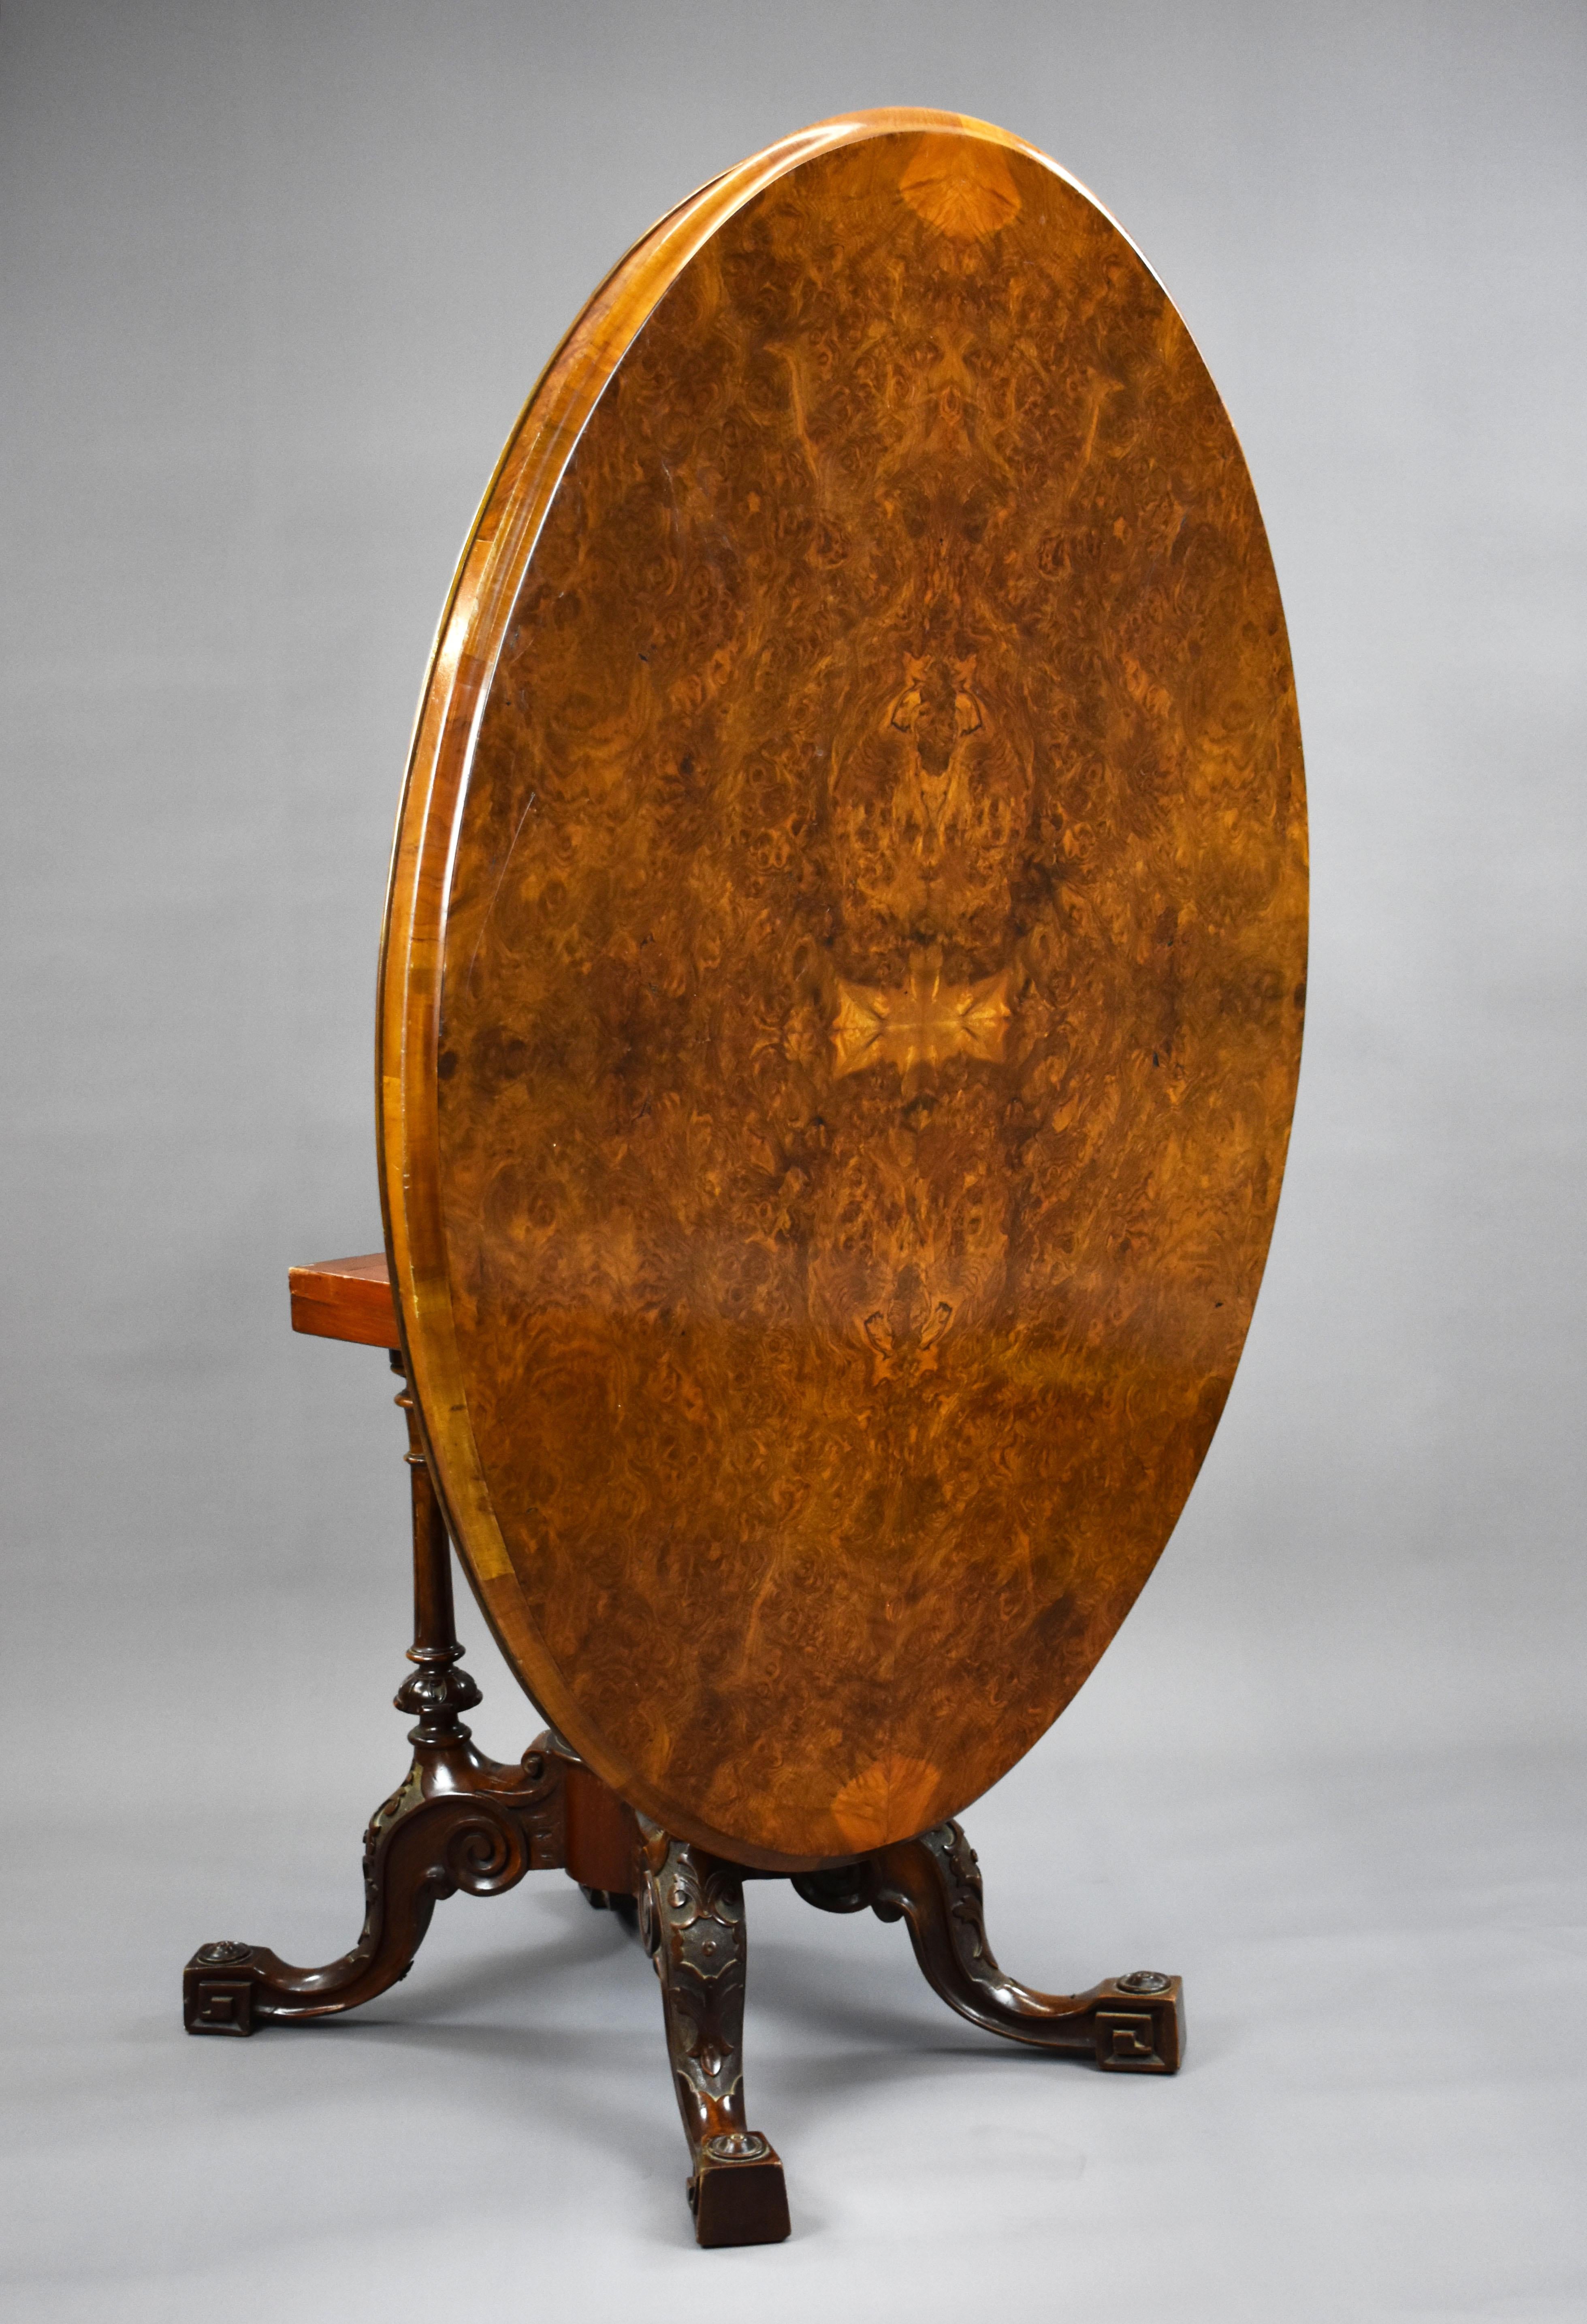 For sale is a Victorian burr walnut oval loo table, having an oval burr walnut top, above a birdcage base with a central finial, standing on elegantly shaped and carved legs. The table remains in good condition for its age retaining a good colour